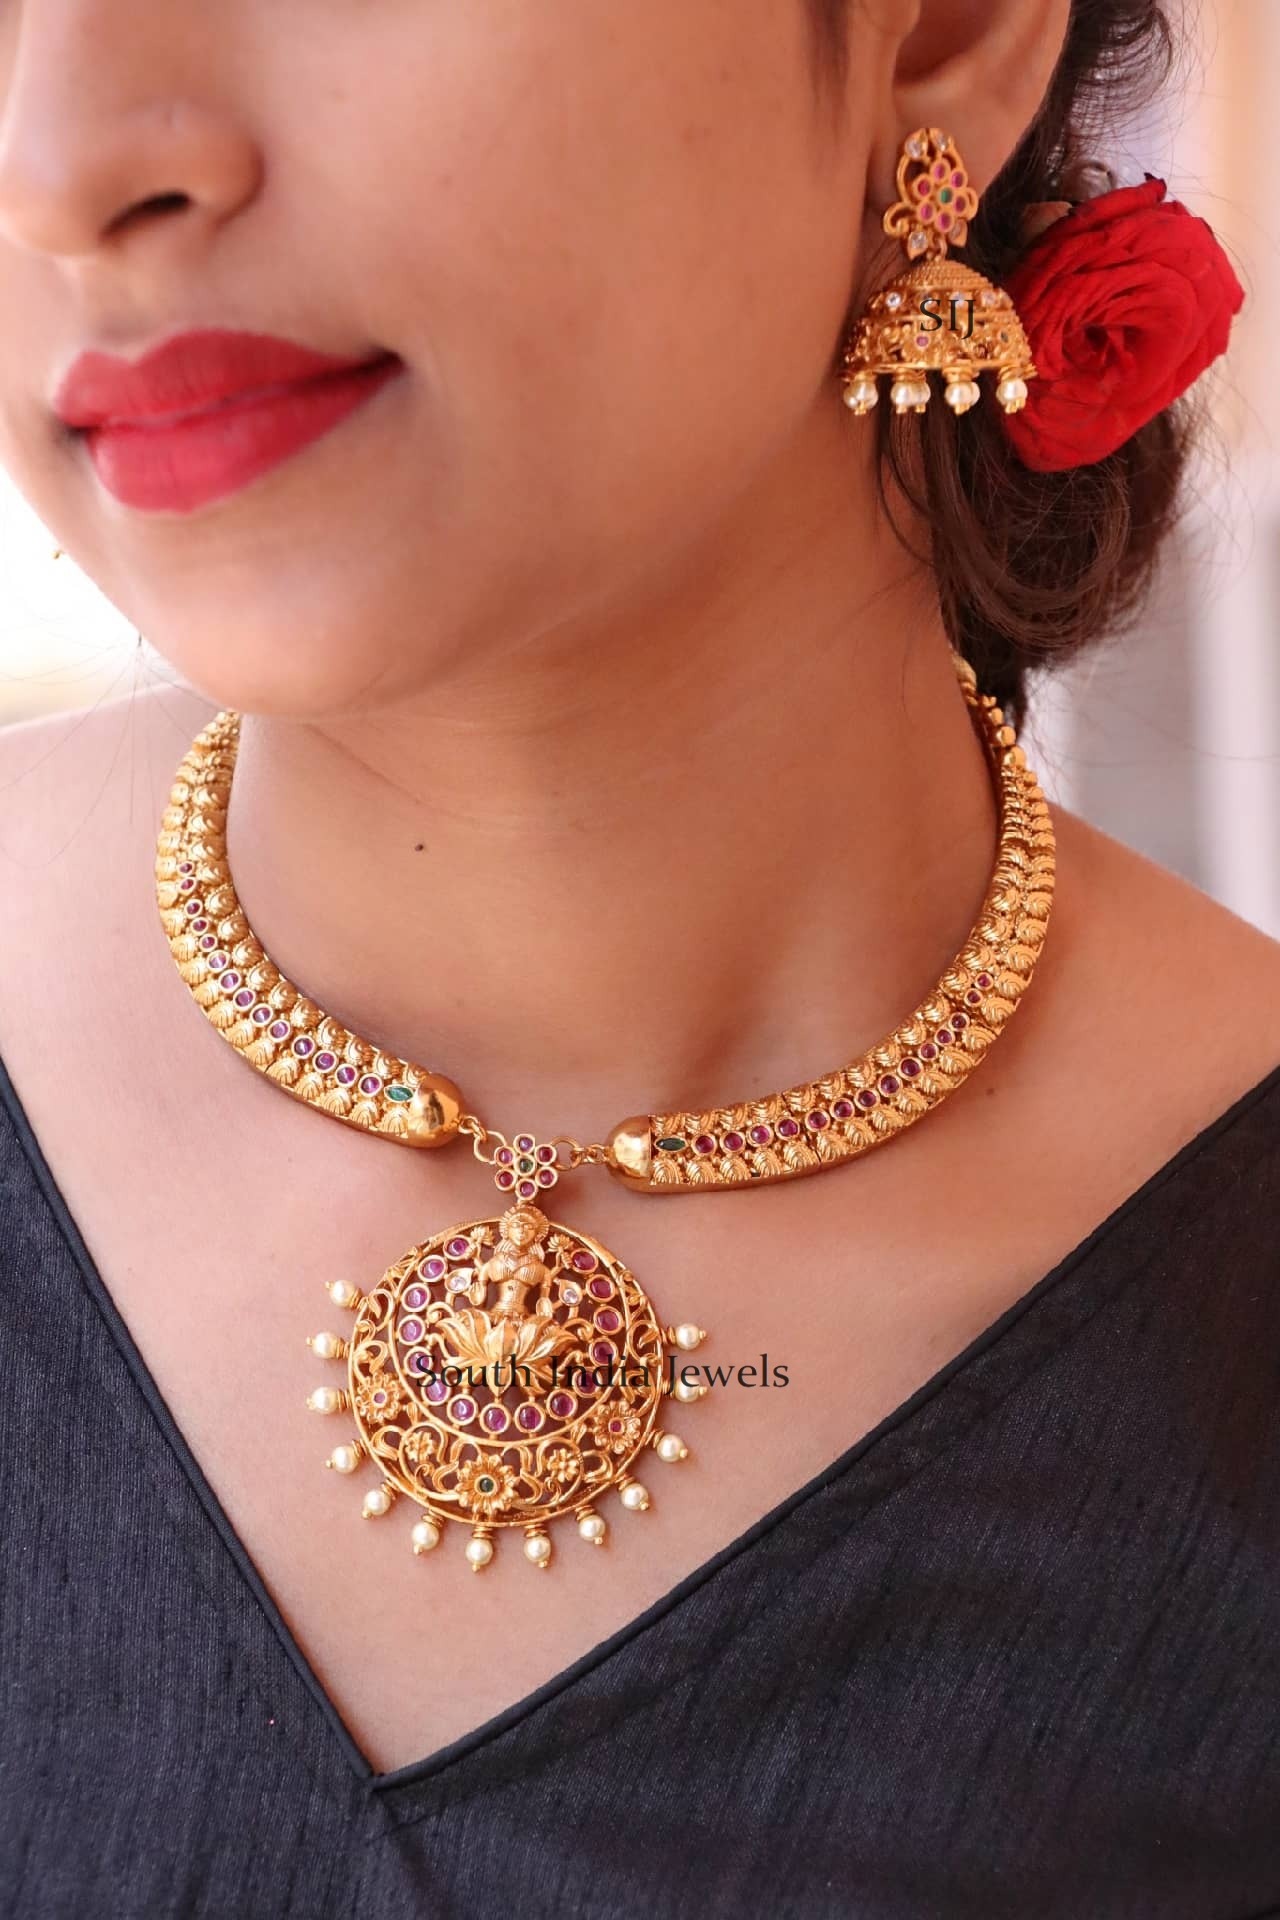 Necklace Set: Buy Gold & Diamond Necklace Set for Women Online | Tanishq